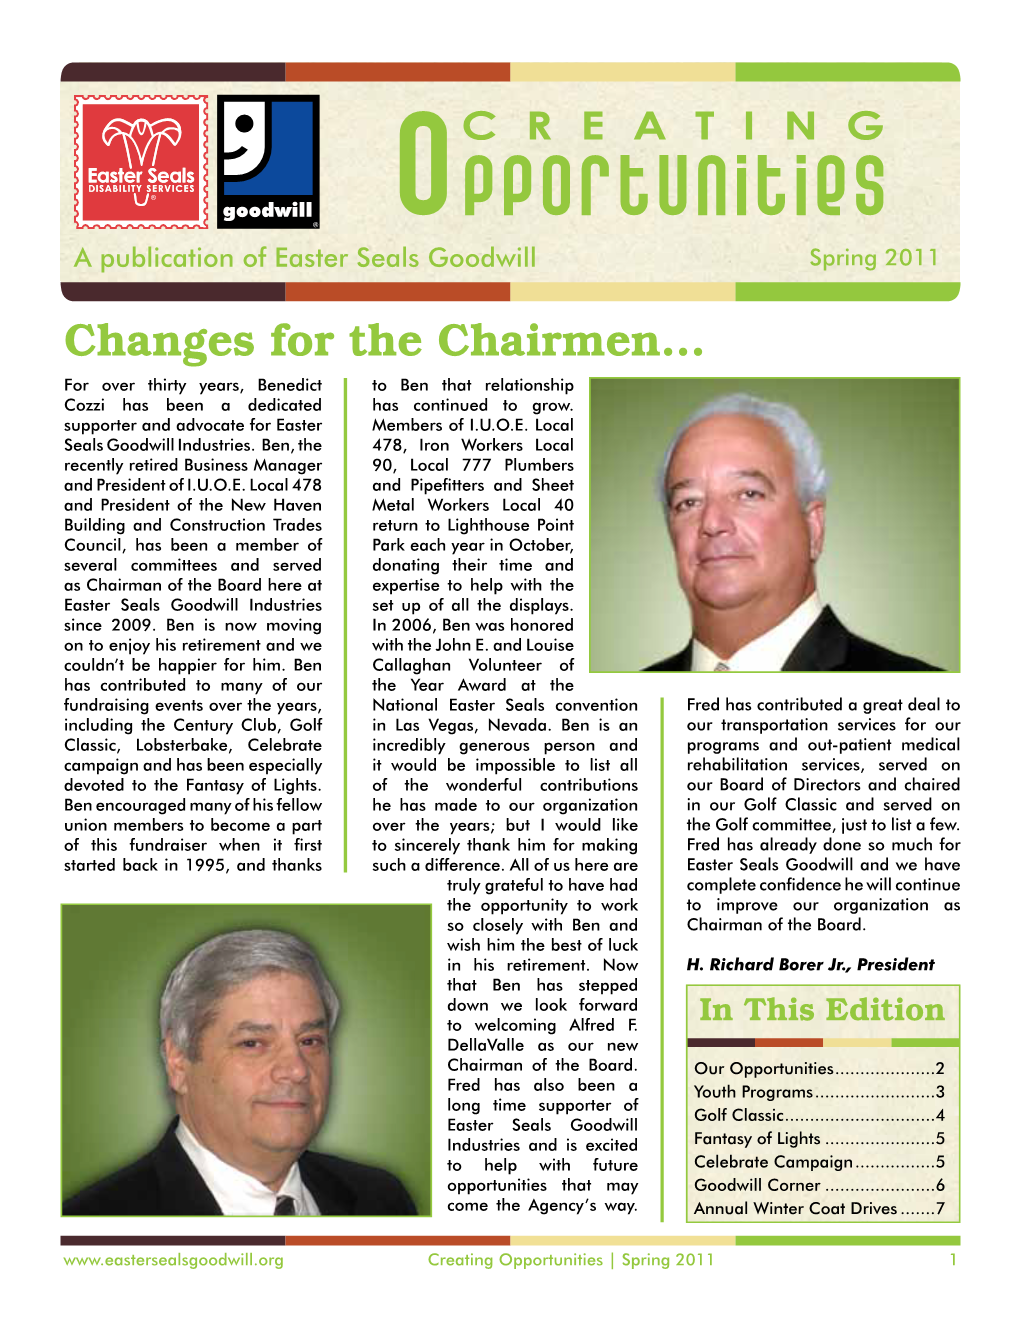 Opportunities ® a Publication of Easter Seals Goodwill Spring 2011